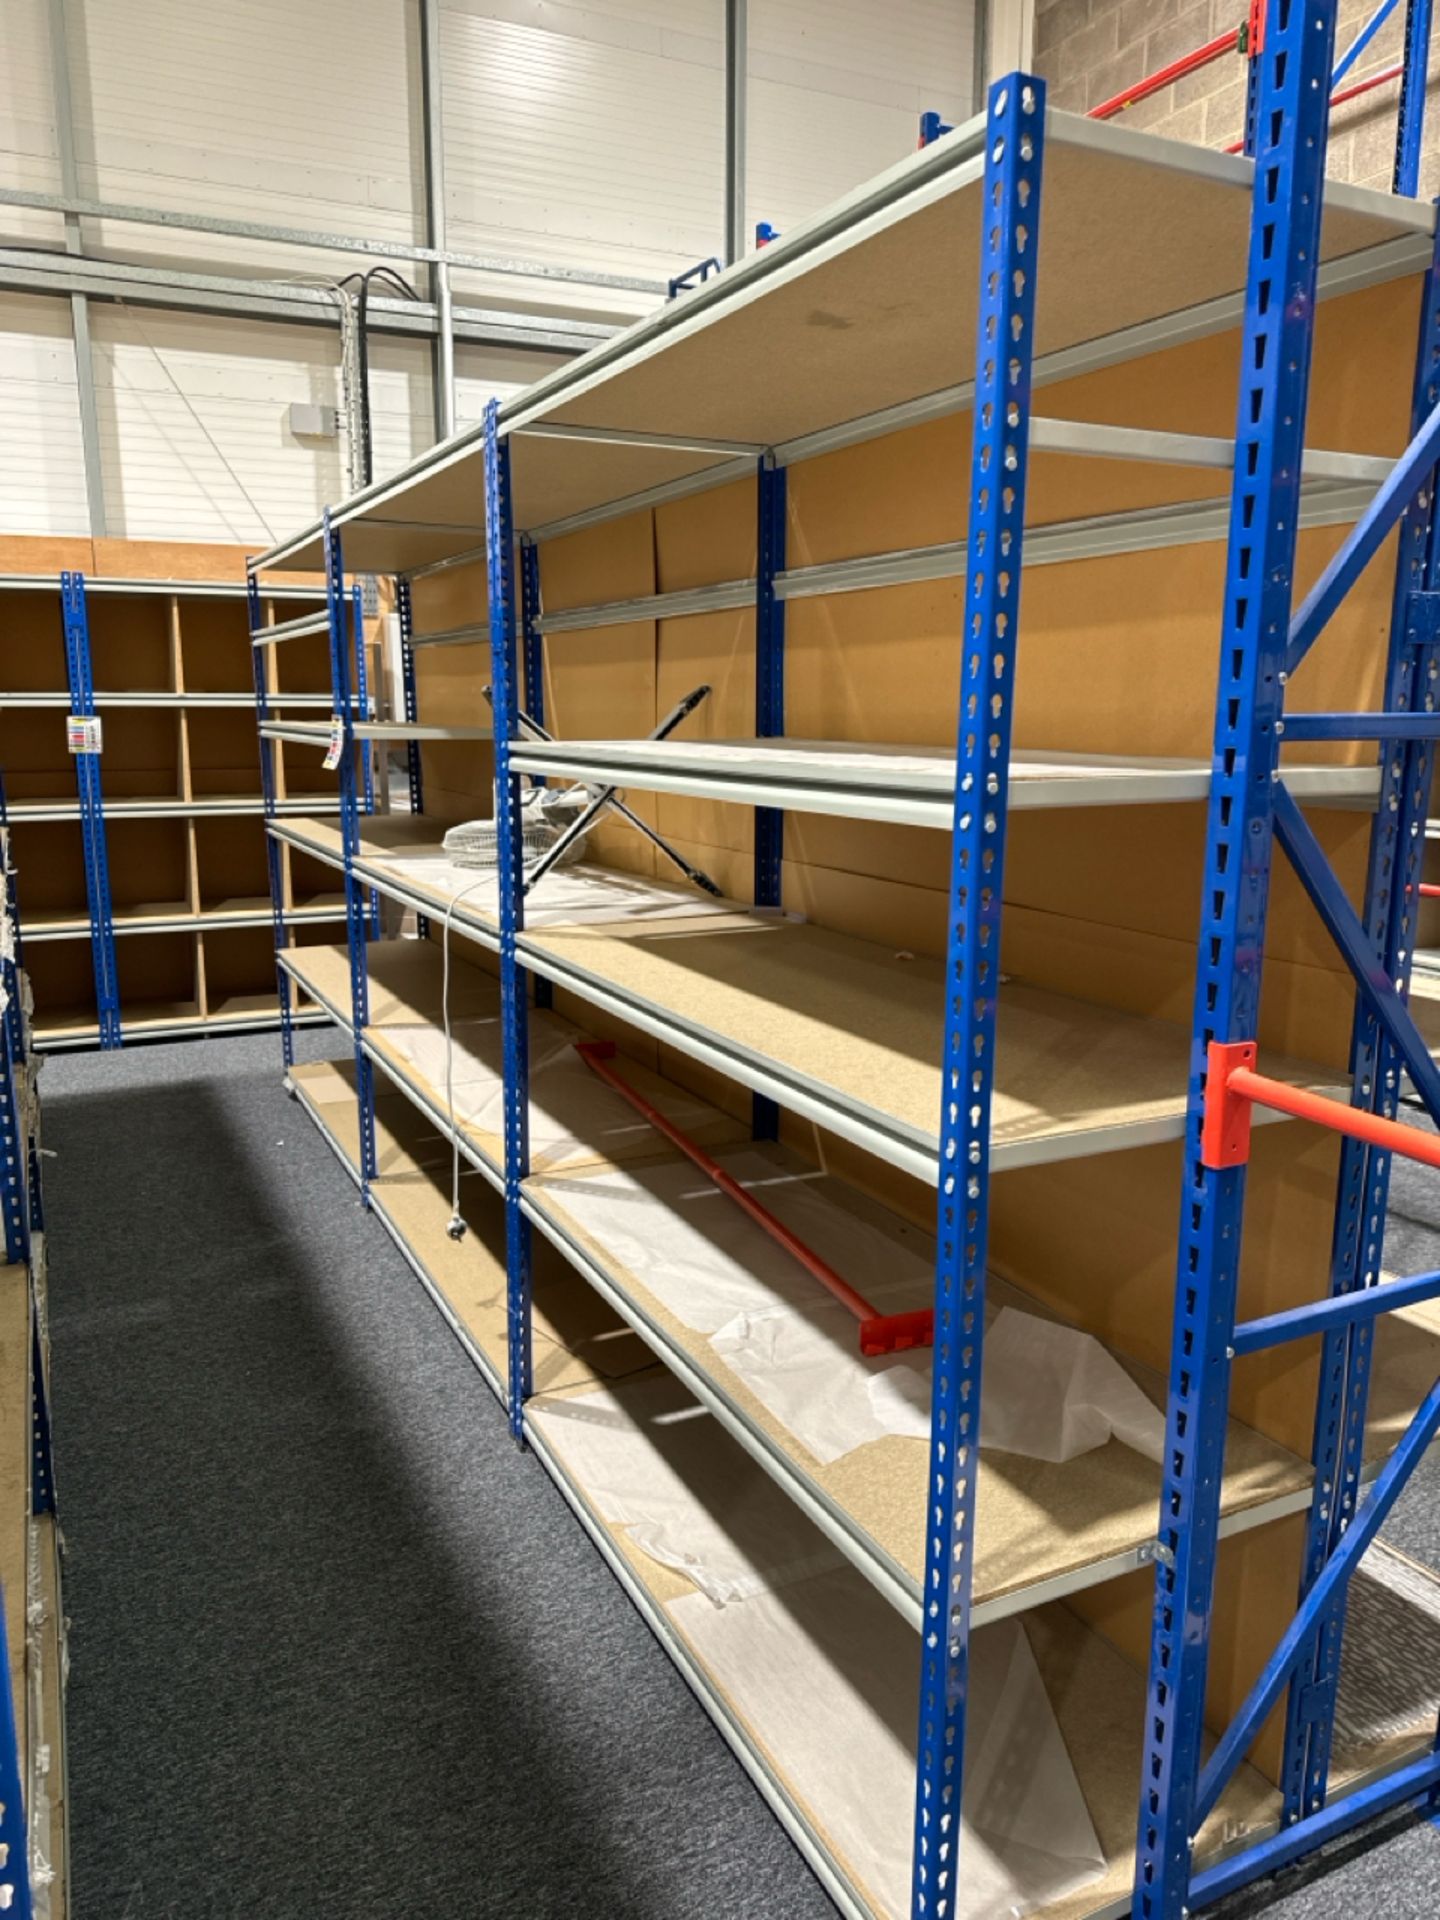 6 Bays Of Back To Back Boltless Racking - Image 3 of 5